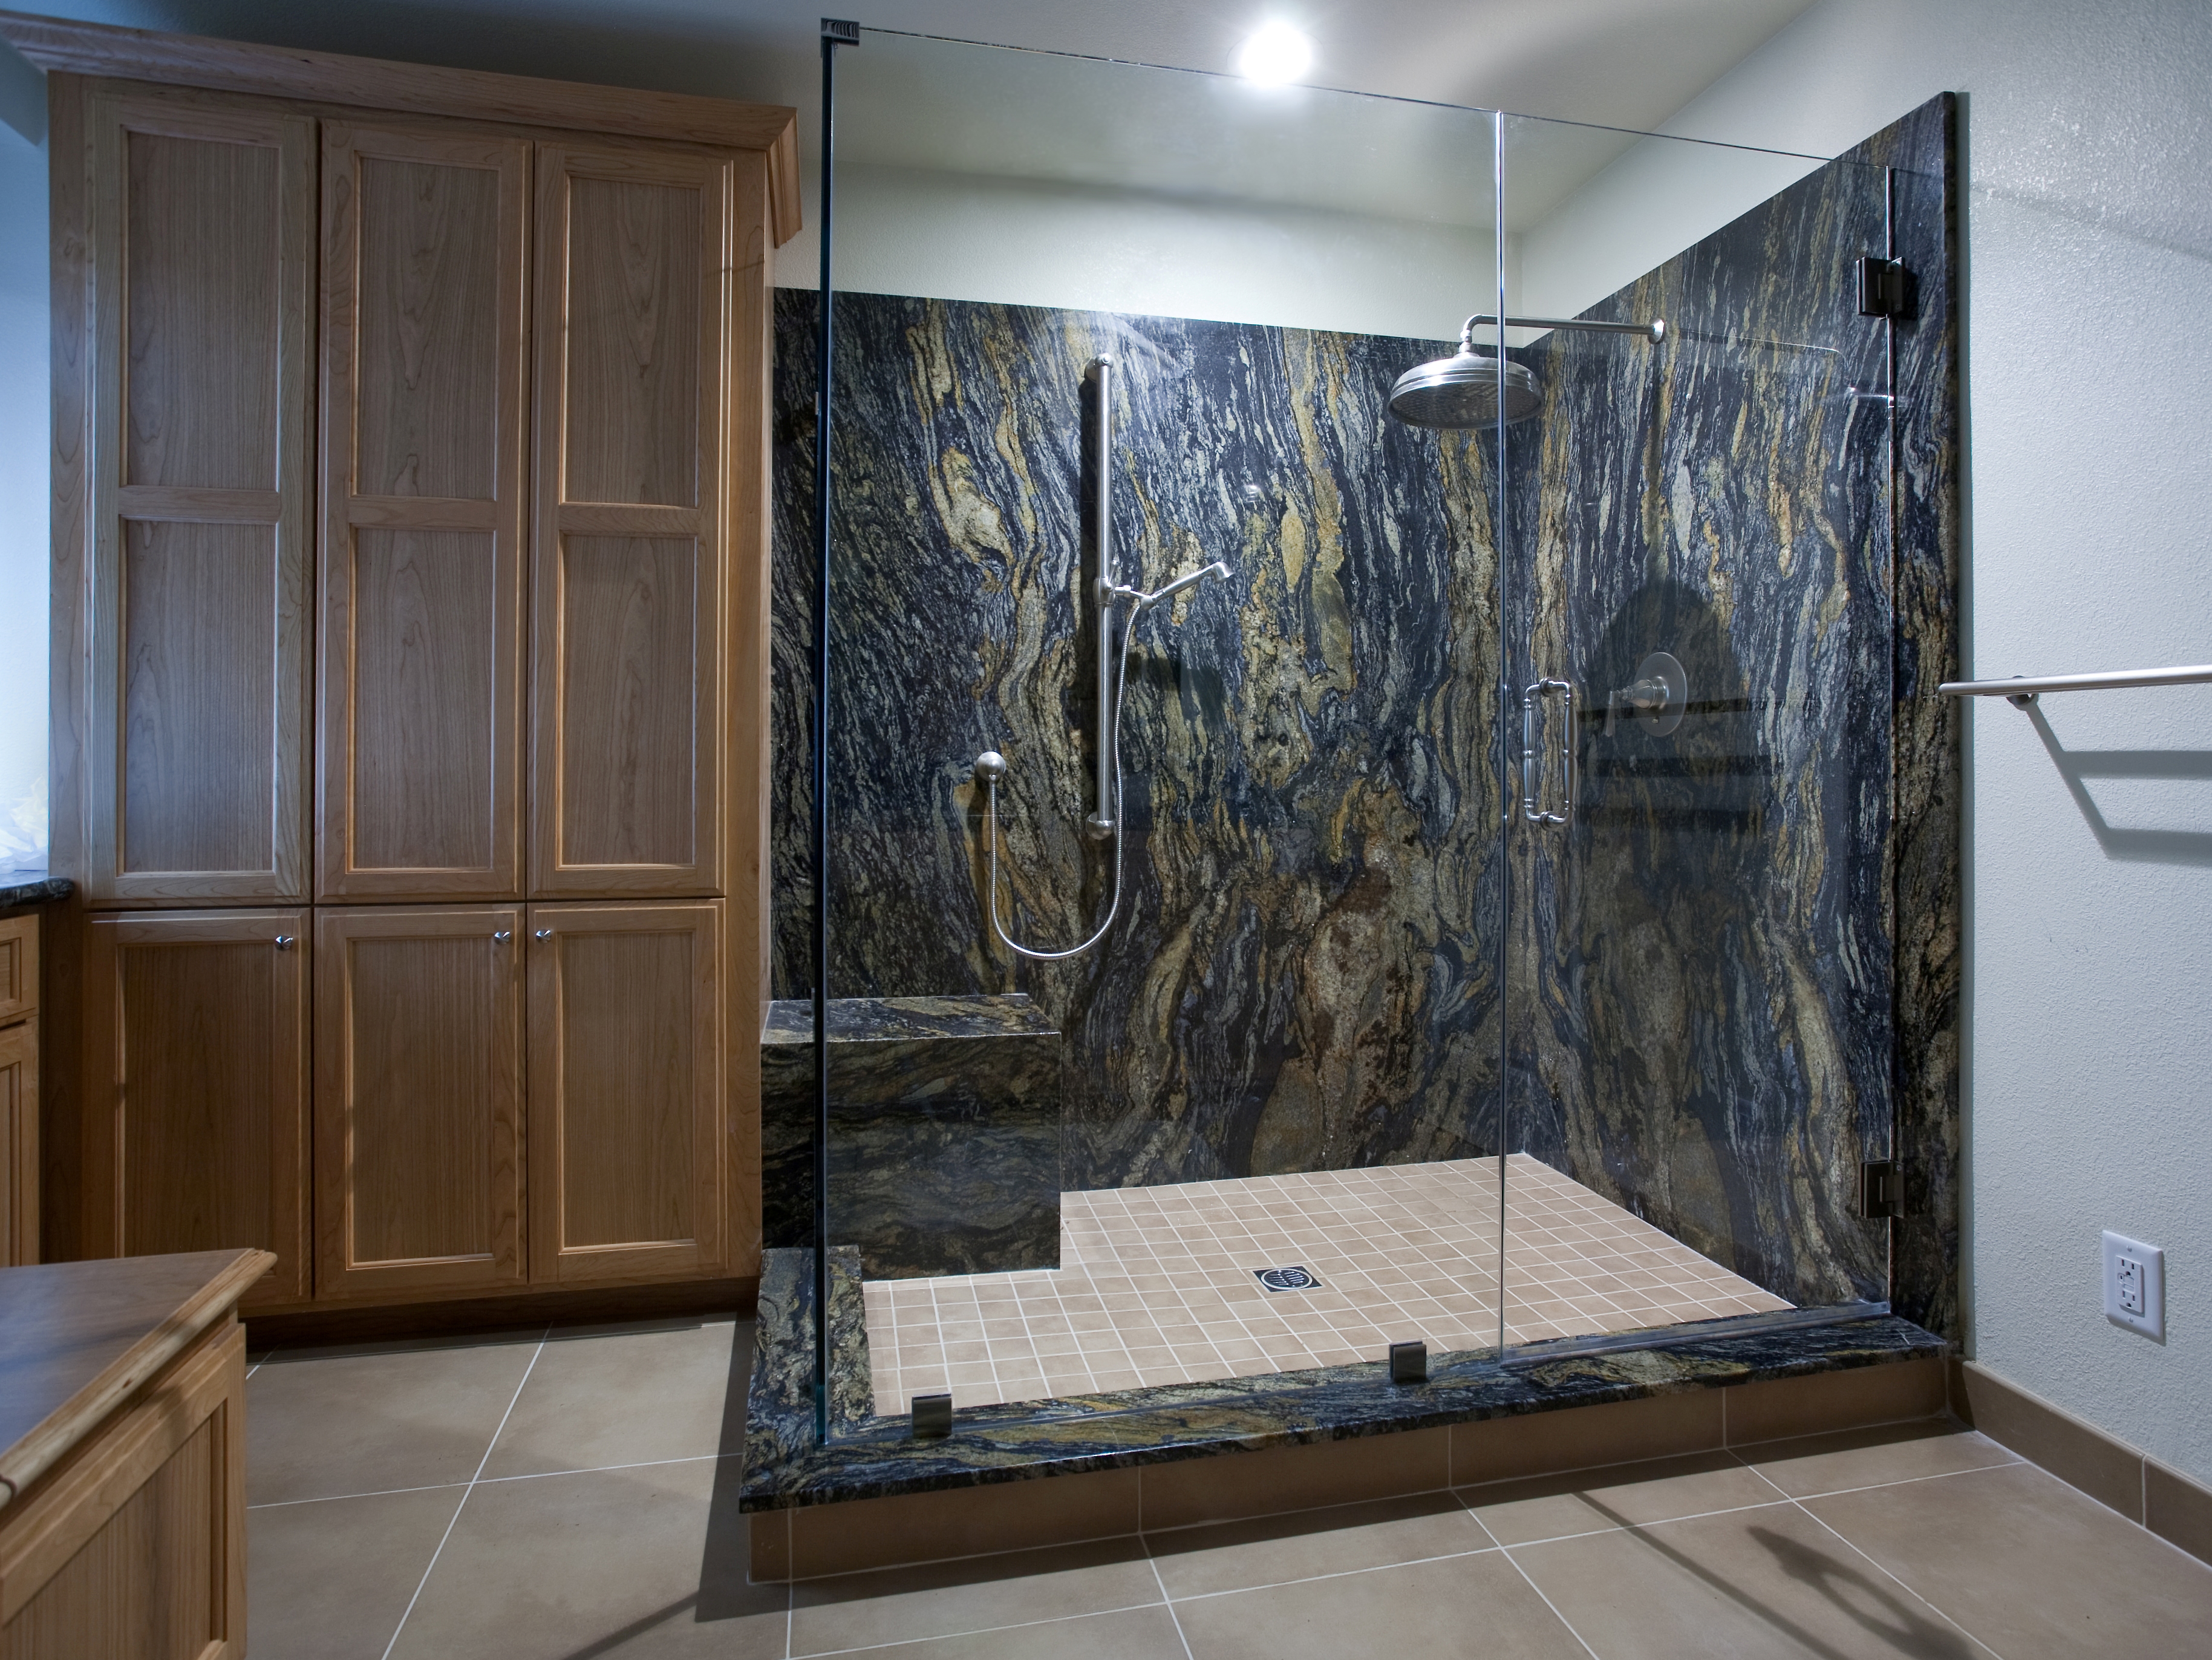 How Much Does a Bathroom Remodel Cost? Setting Realistic ...